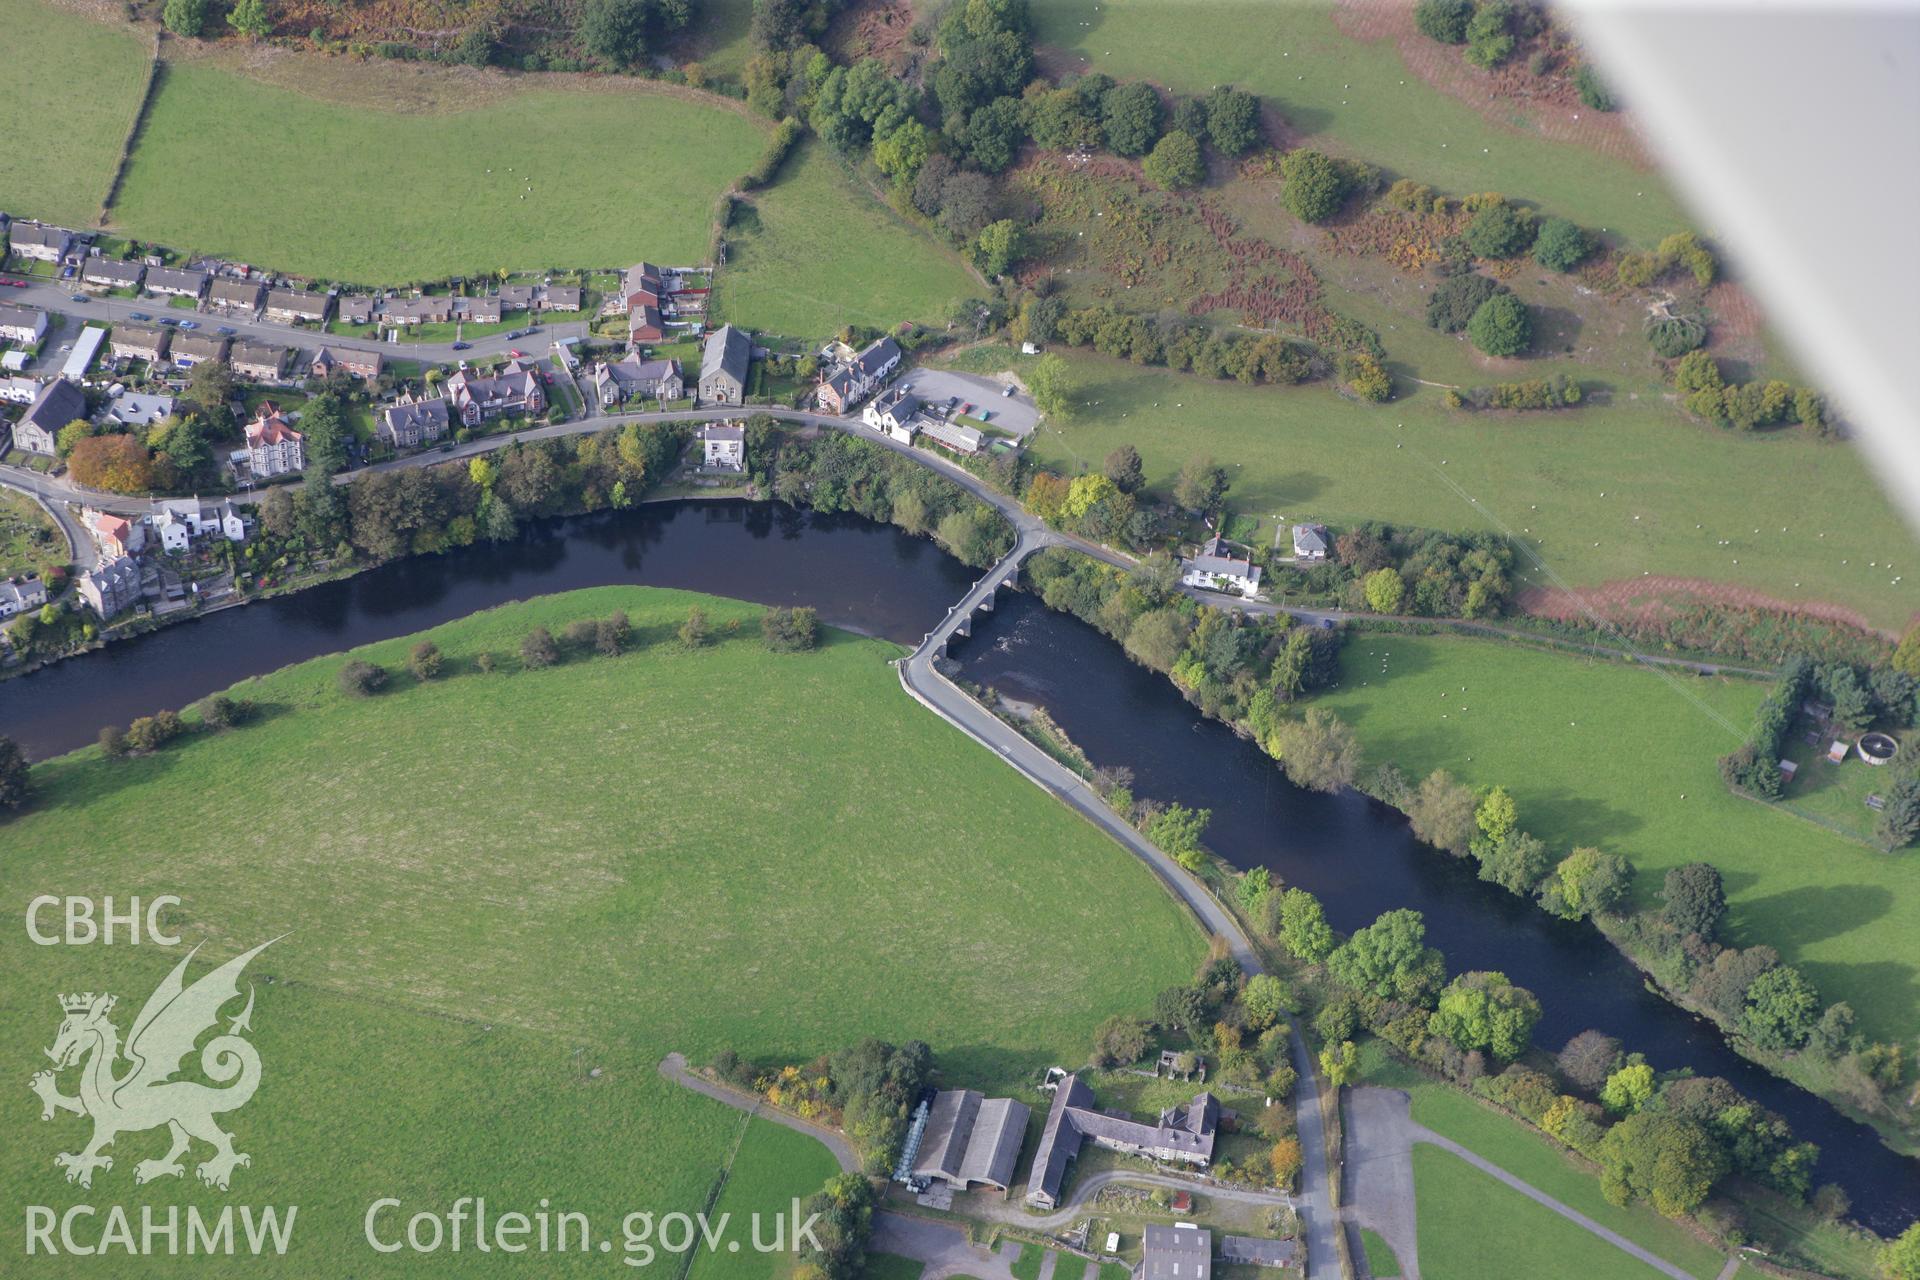 RCAHMW colour oblique aerial photograph of Pont Carrog. Taken on 13 October 2009 by Toby Driver